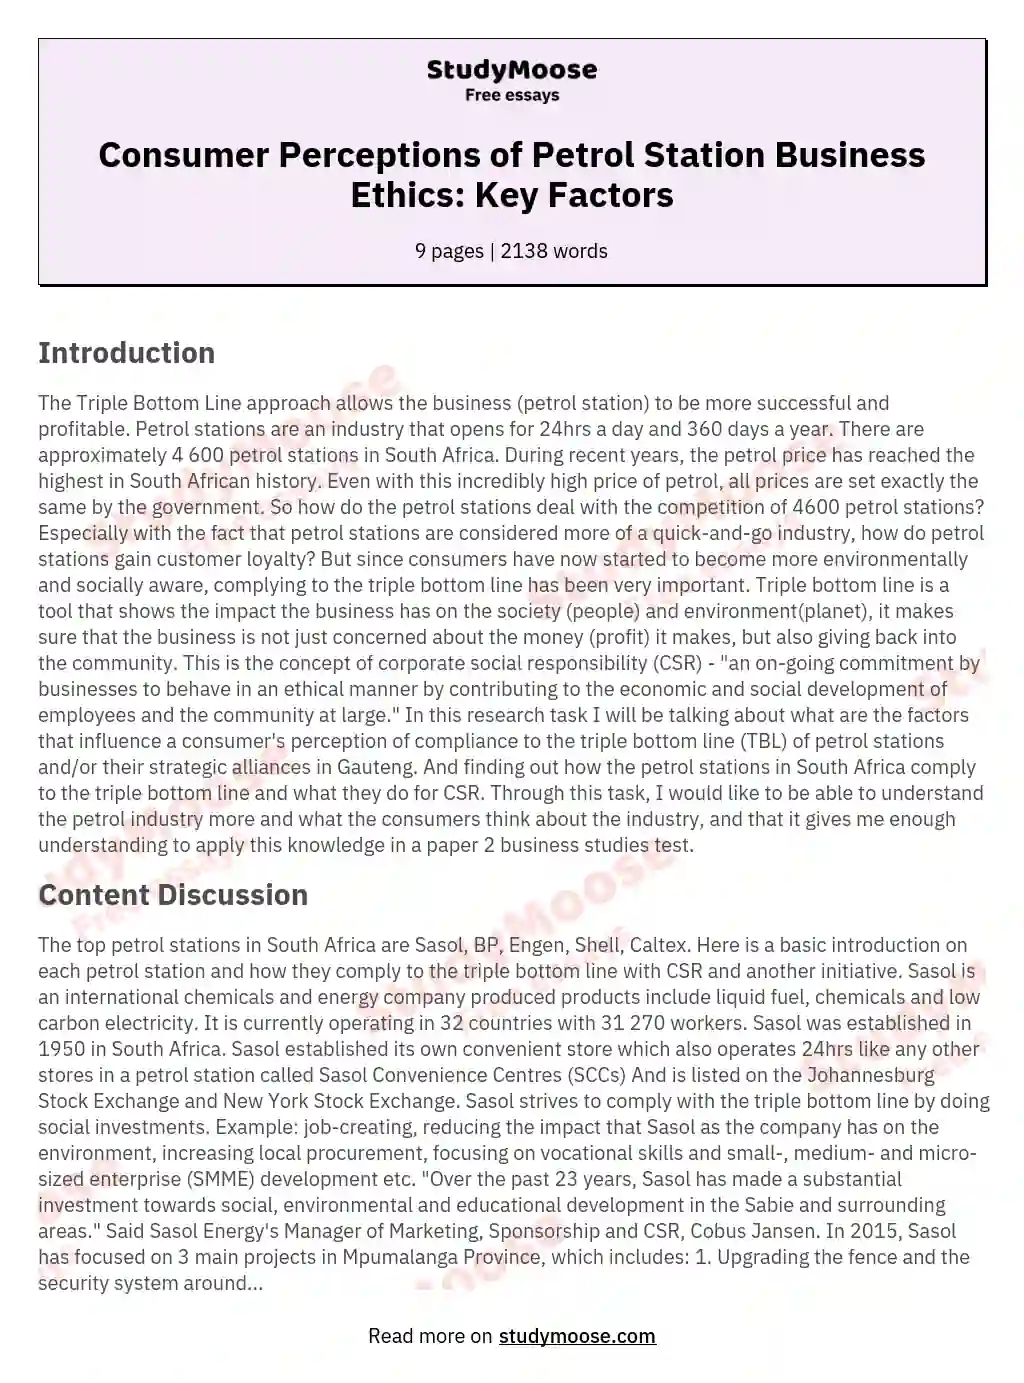 Factors That Influence Consumer's Perception Of Business Ethics Of Petrol Stations